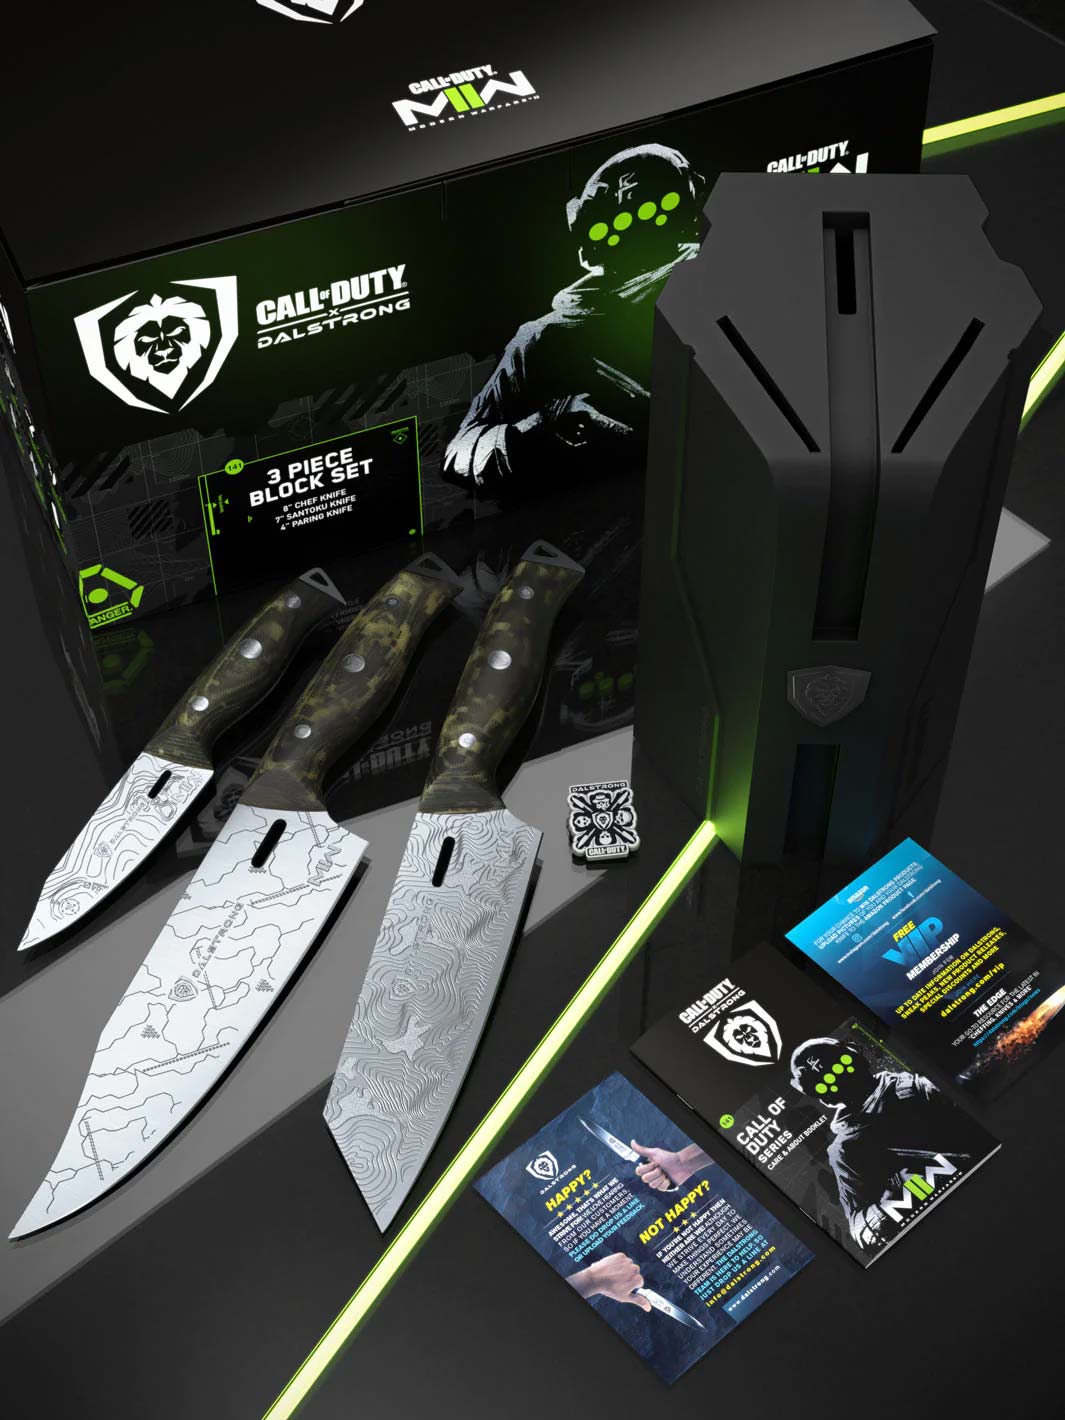 Dalstrong call of duty series 3 piece knife set with block beside it's premium packaging.